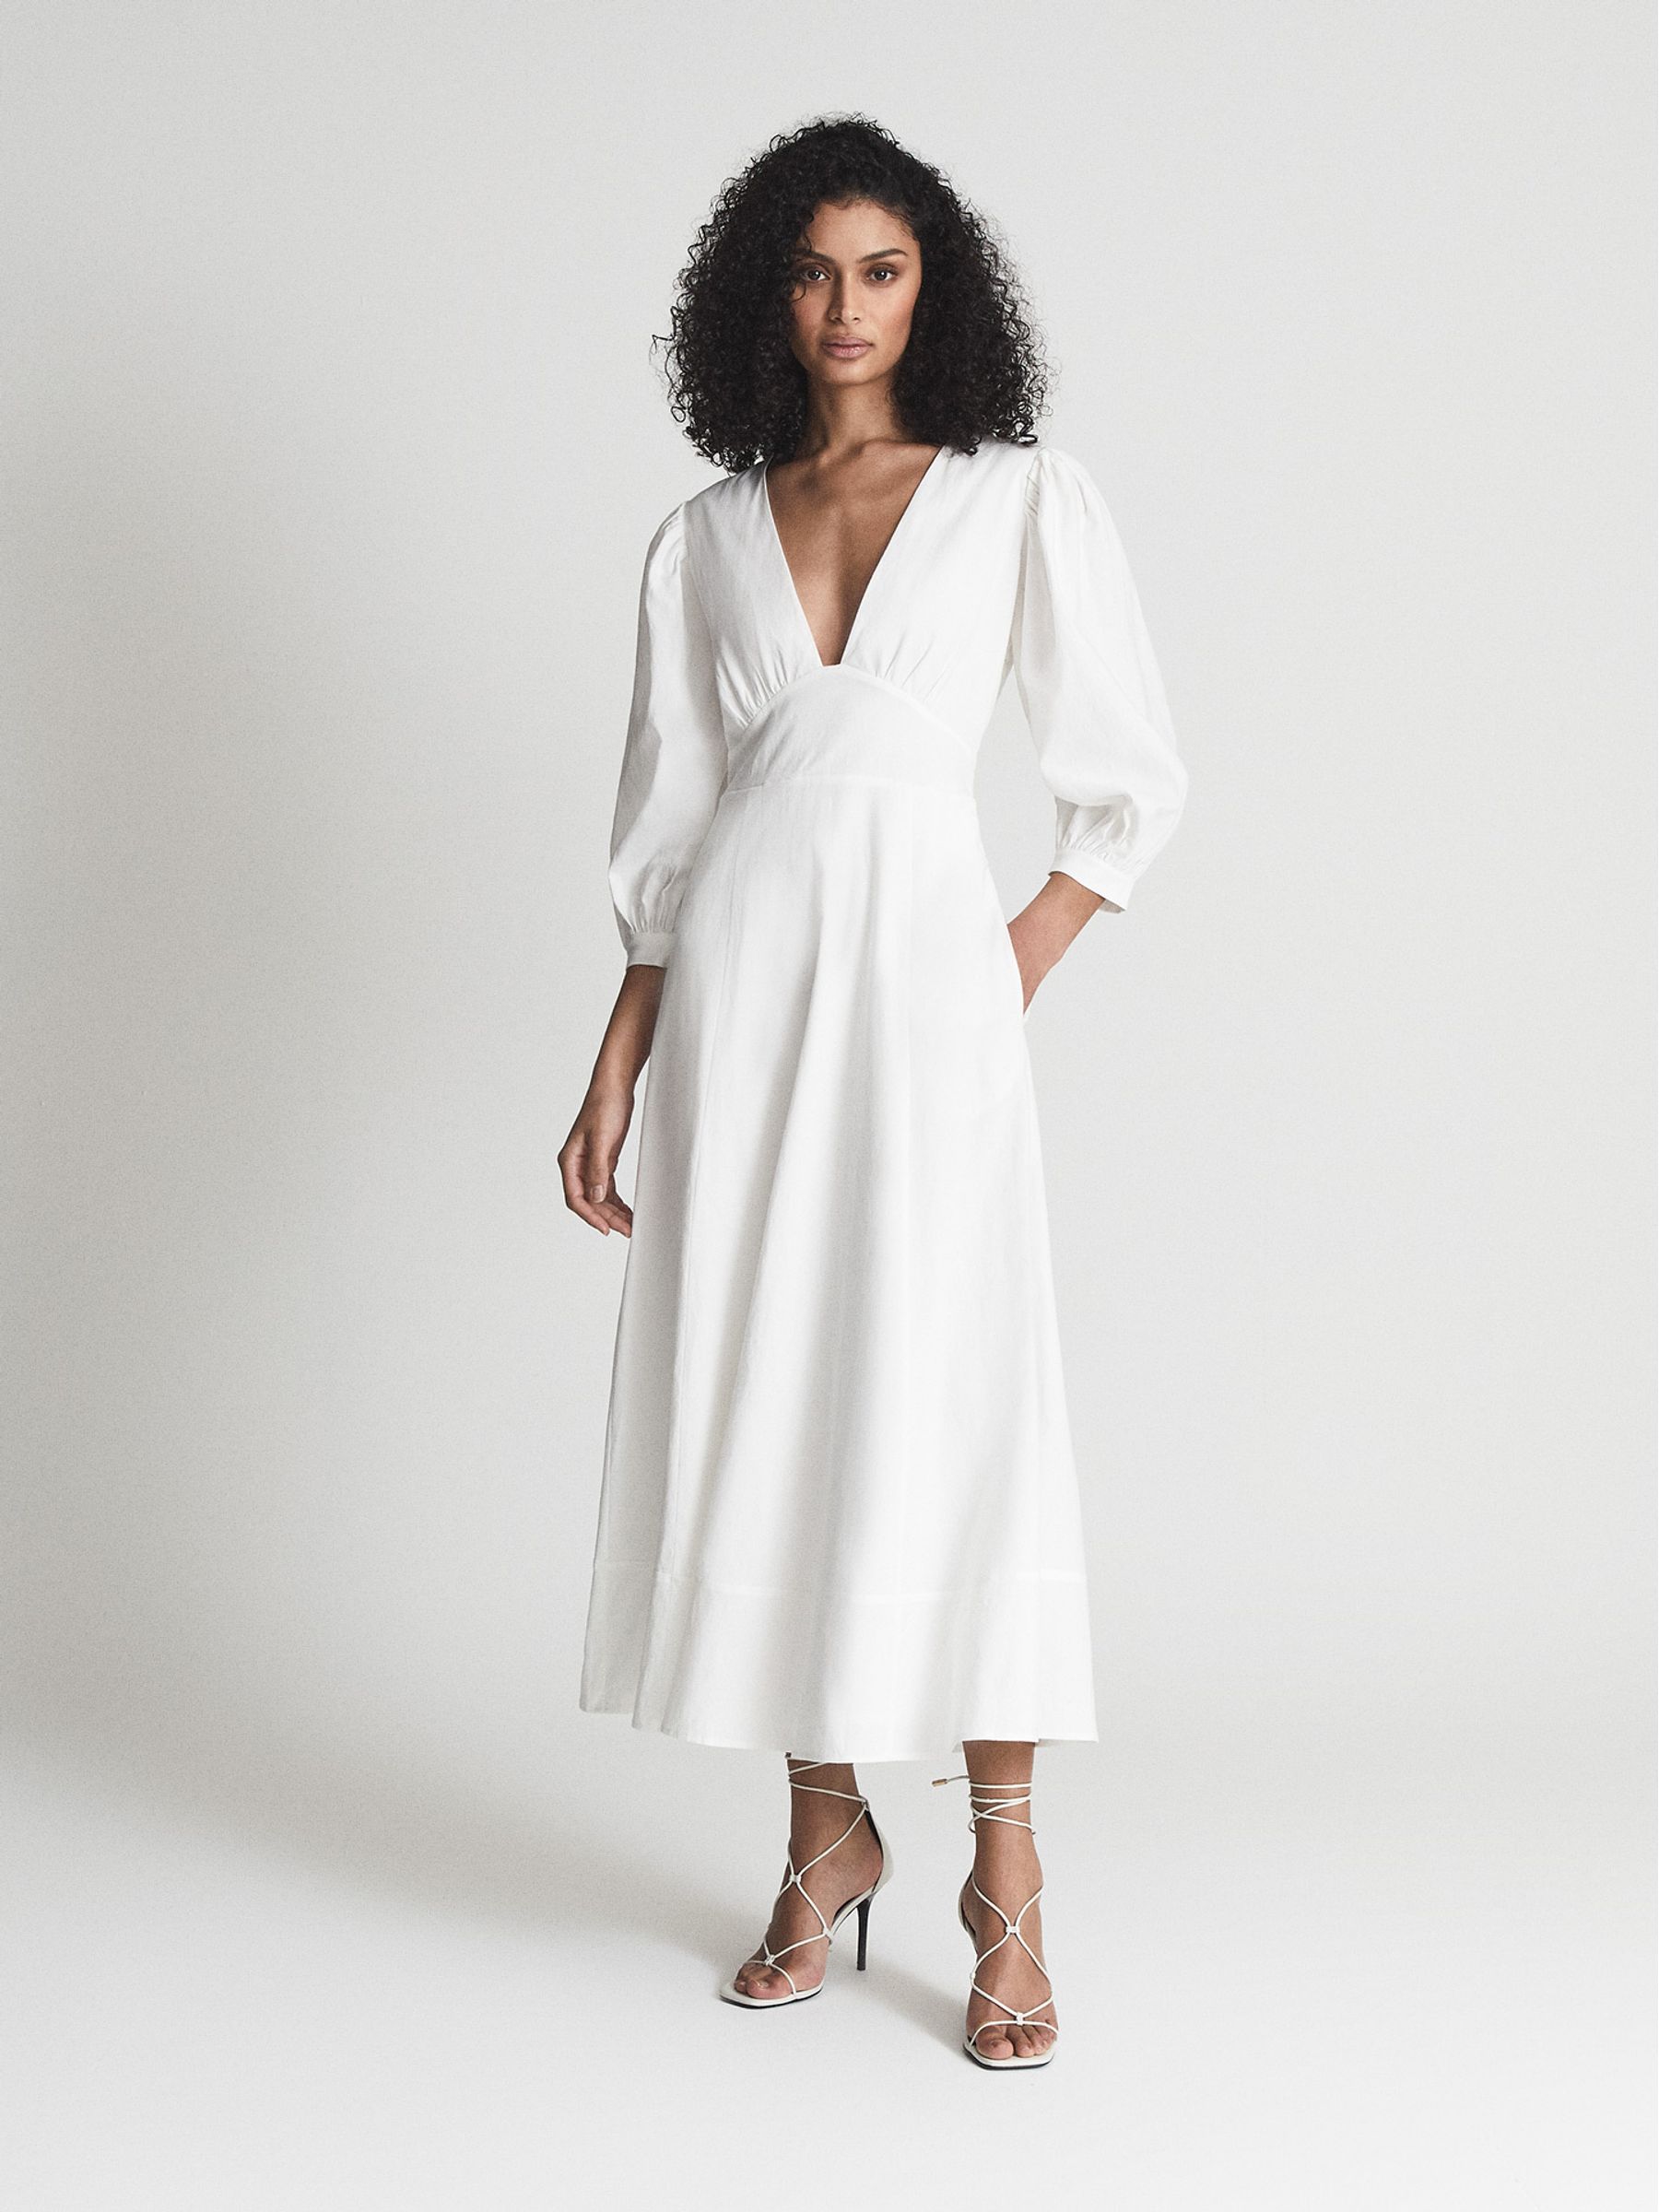 The Cult High-Street Summer Dresses of 2022 | Who What Wear UK